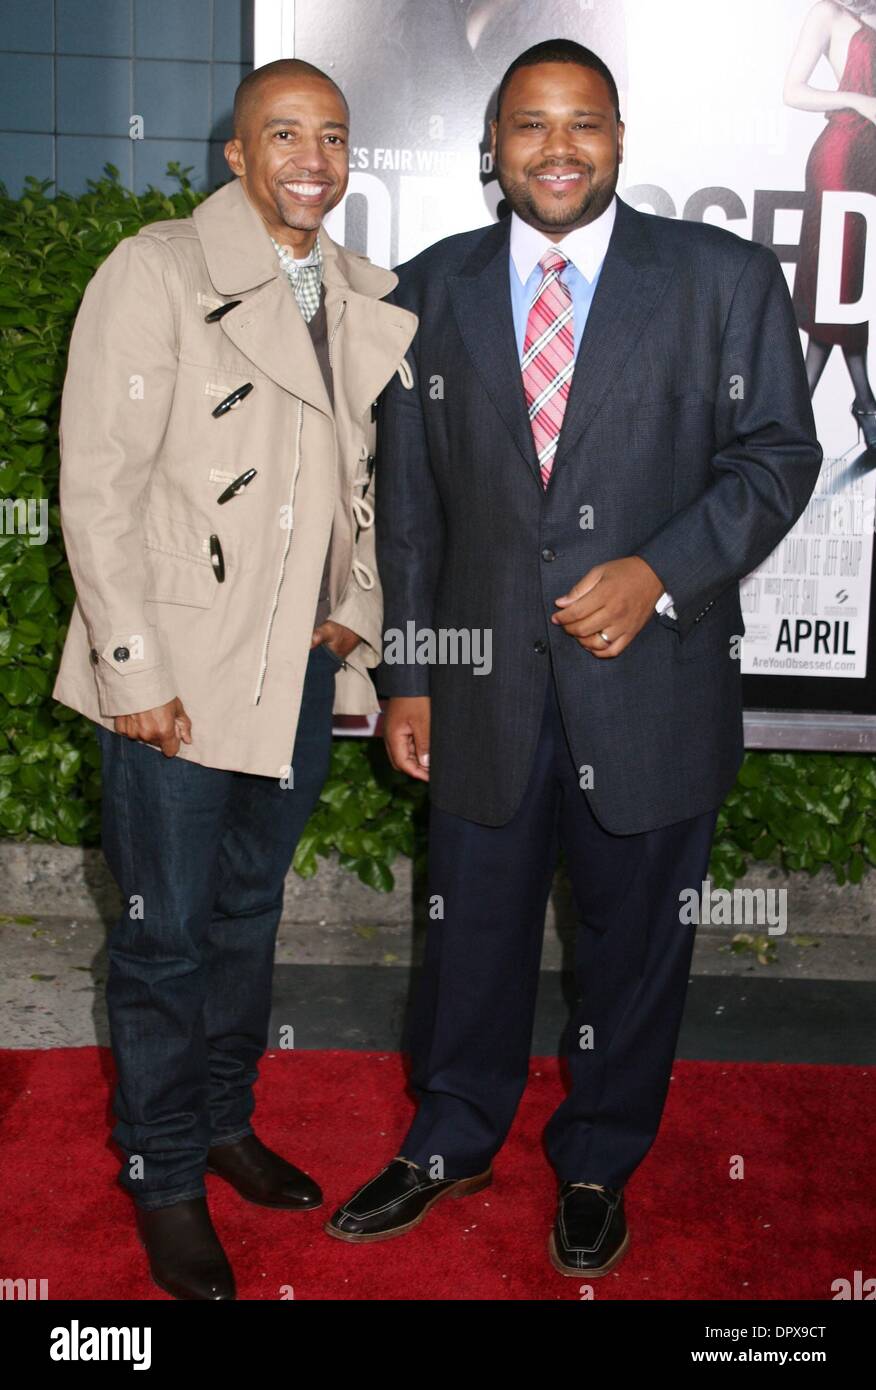 Apr 23, 2009 - New York, New York, USA - KEVIN LYLES and actor ANTHONY ANDERSON at the New York premiere of 'Obsessed' held at School of Visual Arts. (Credit Image: Â© Nancy Kaszerman/ZUMA Press) Stock Photo